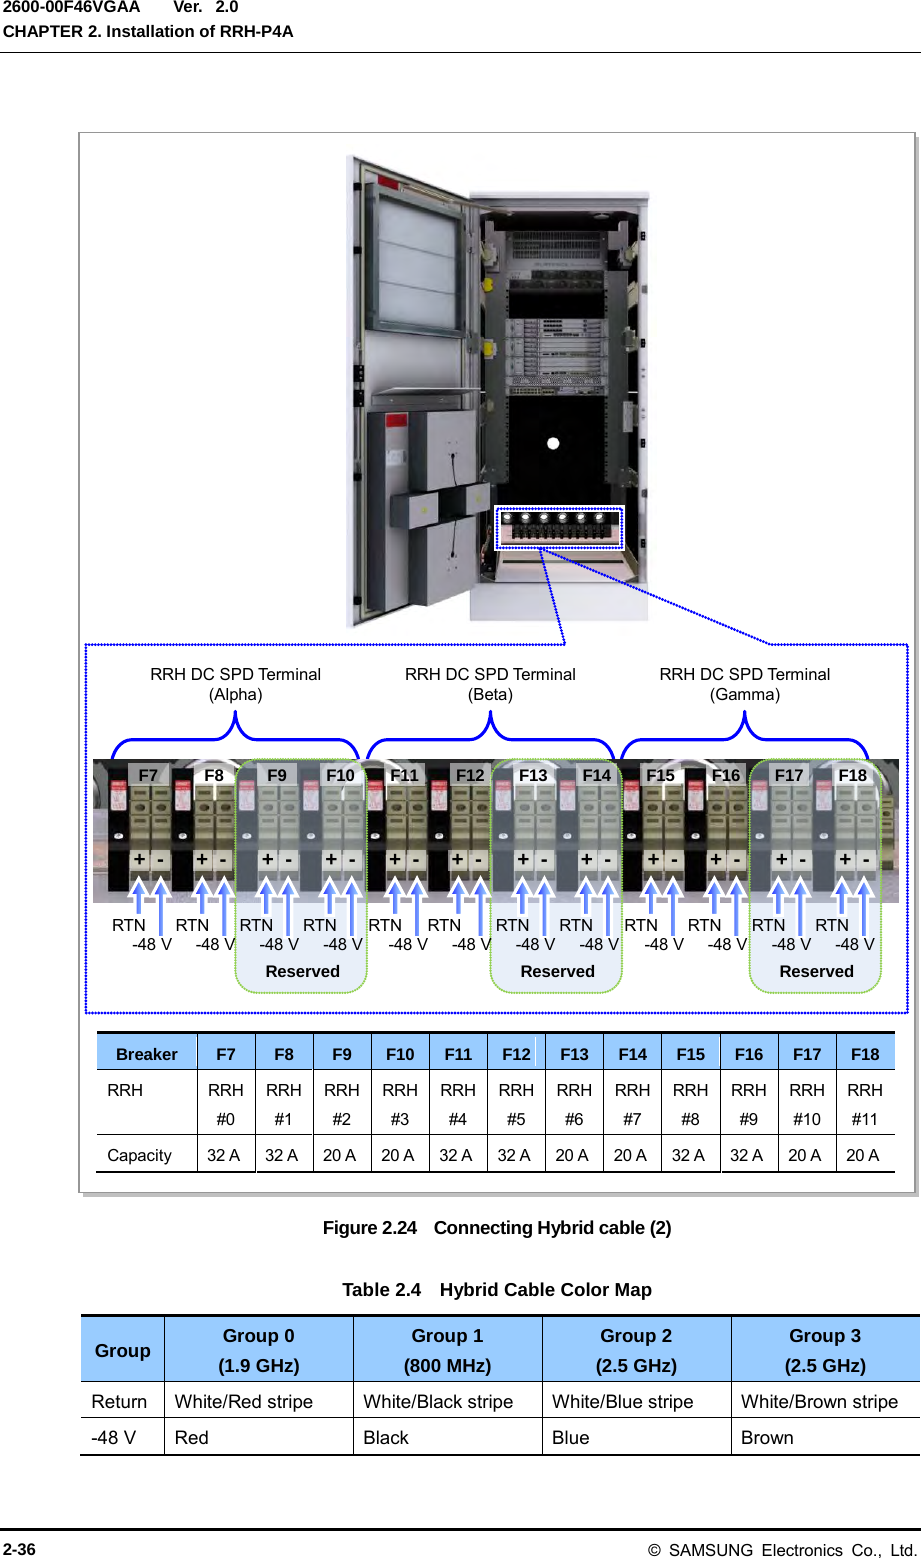  Ver.  CHAPTER 2. Installation of RRH-P4A 2600-00F46VGAA 2.0  Figure 2.24    Connecting Hybrid cable (2)  Table 2.4  Hybrid Cable Color Map Group Group 0 (1.9 GHz) Group 1 (800 MHz) Group 2 (2.5 GHz) Group 3 (2.5 GHz) Return White/Red stripe White/Black stripe White/Blue stripe White/Brown stripe -48 V Red Black Blue Brown  Breaker F7 F8 F9 F10 F11 F12 F13 F14 F15 F16 F17 F18 RRH RRH#0 RRH#1 RRH#2 RRH#3 RRH#4 RRH#5 RRH#6 RRH#7 RRH#8 RRH#9 RRH#10 RRH#11 Capacity 32 A 32 A 20 A 20 A 32 A 32 A 20 A 20 A 32 A 32 A 20 A 20 A    RRH DC SPD Terminal (Alpha) RRH DC SPD Terminal (Beta) RRH DC SPD Terminal (Gamma) Reserved Reserved Reserved RTN -48 V RTN -48 V RTN -48 V RTN -48 V RTN -48 V RTN -48 V RTN -48 V RTN -48 V RTN -48 V RTN -48 V RTN -48 V RTN -48 V + - + - + - + - + - + - + - + - + - + - + - + - F7 F8 F9 F10 F11 F12 F13 F14 F15 F16 F17 F18 2-36 © SAMSUNG Electronics Co., Ltd. 